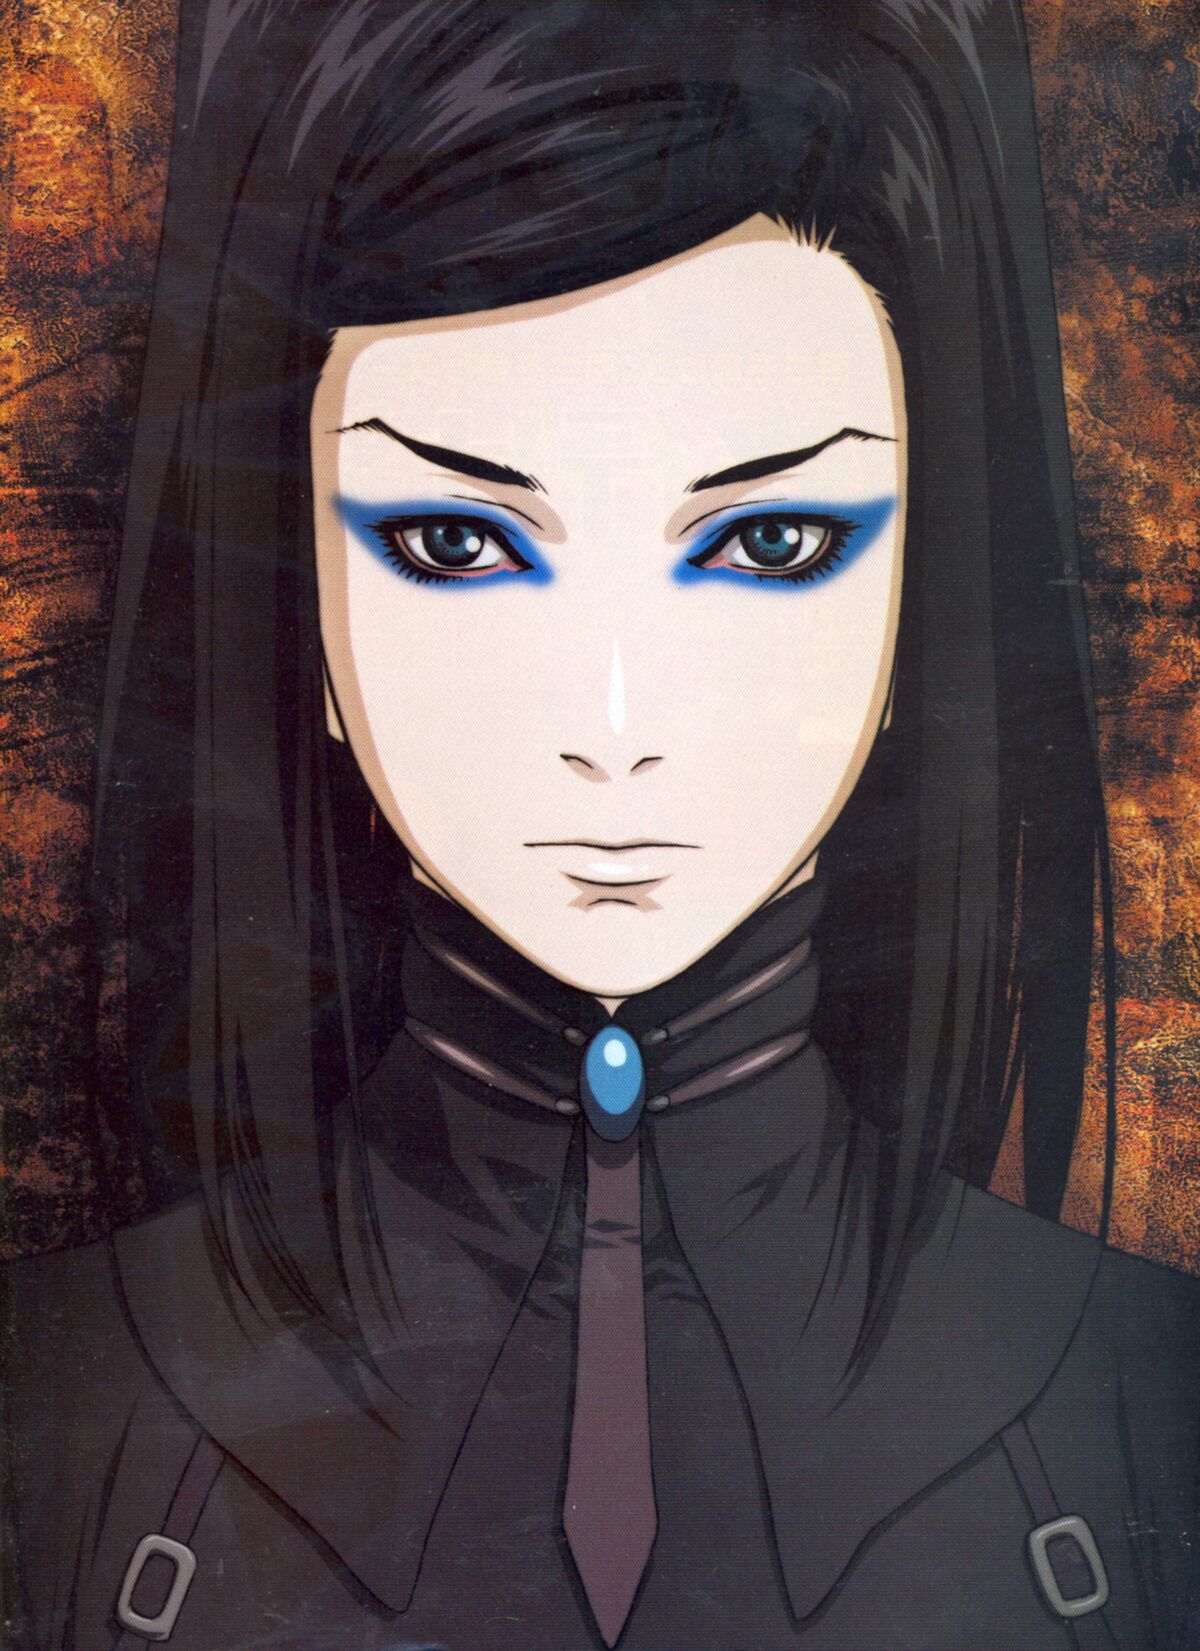 Re-l Mayer from Ergo proxy, female anime character art, Stable Diffusion